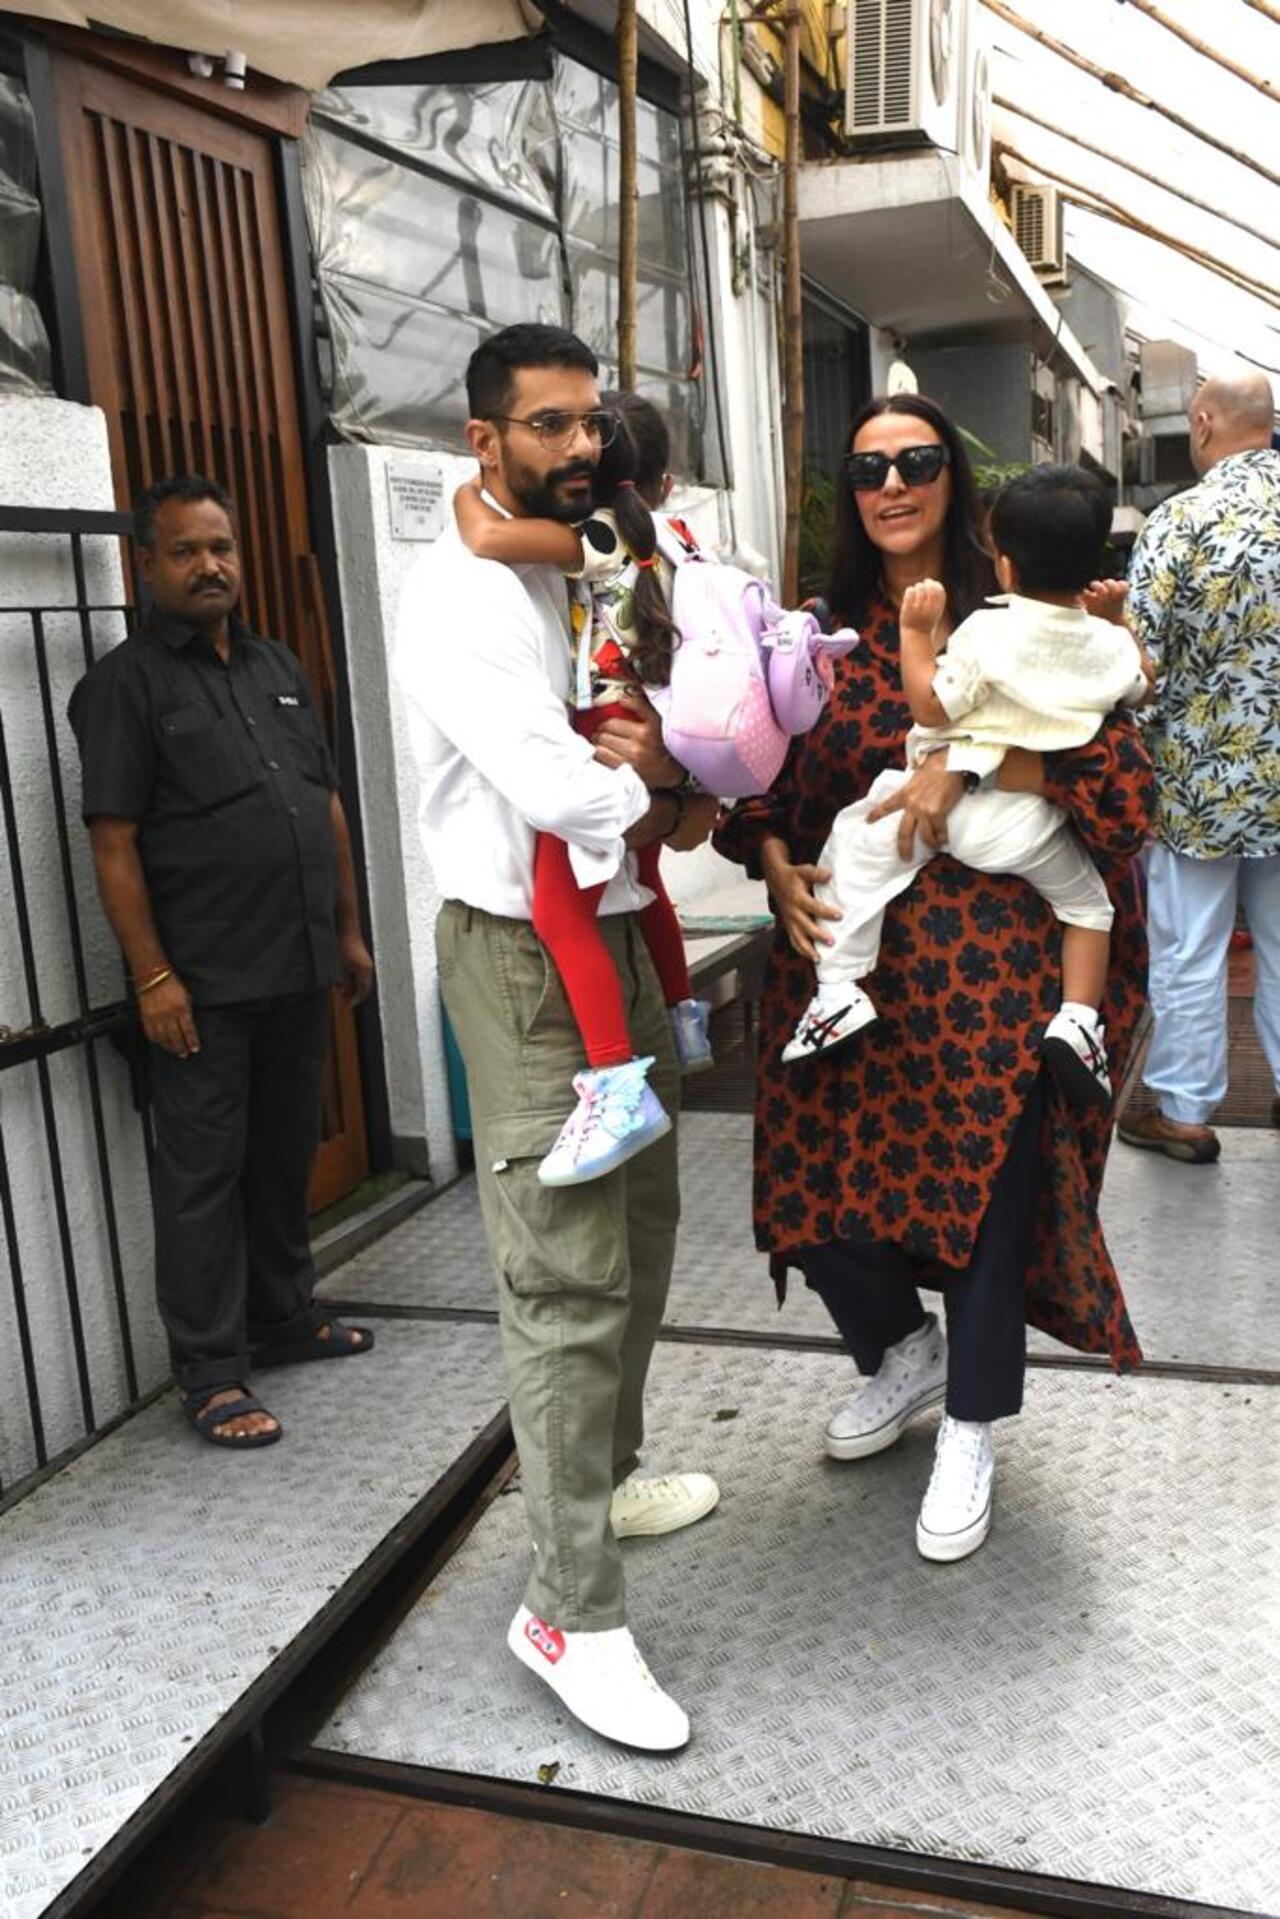 Neha Dhupia and Angad Bedi were clicked with their kids as they went out and about in the city